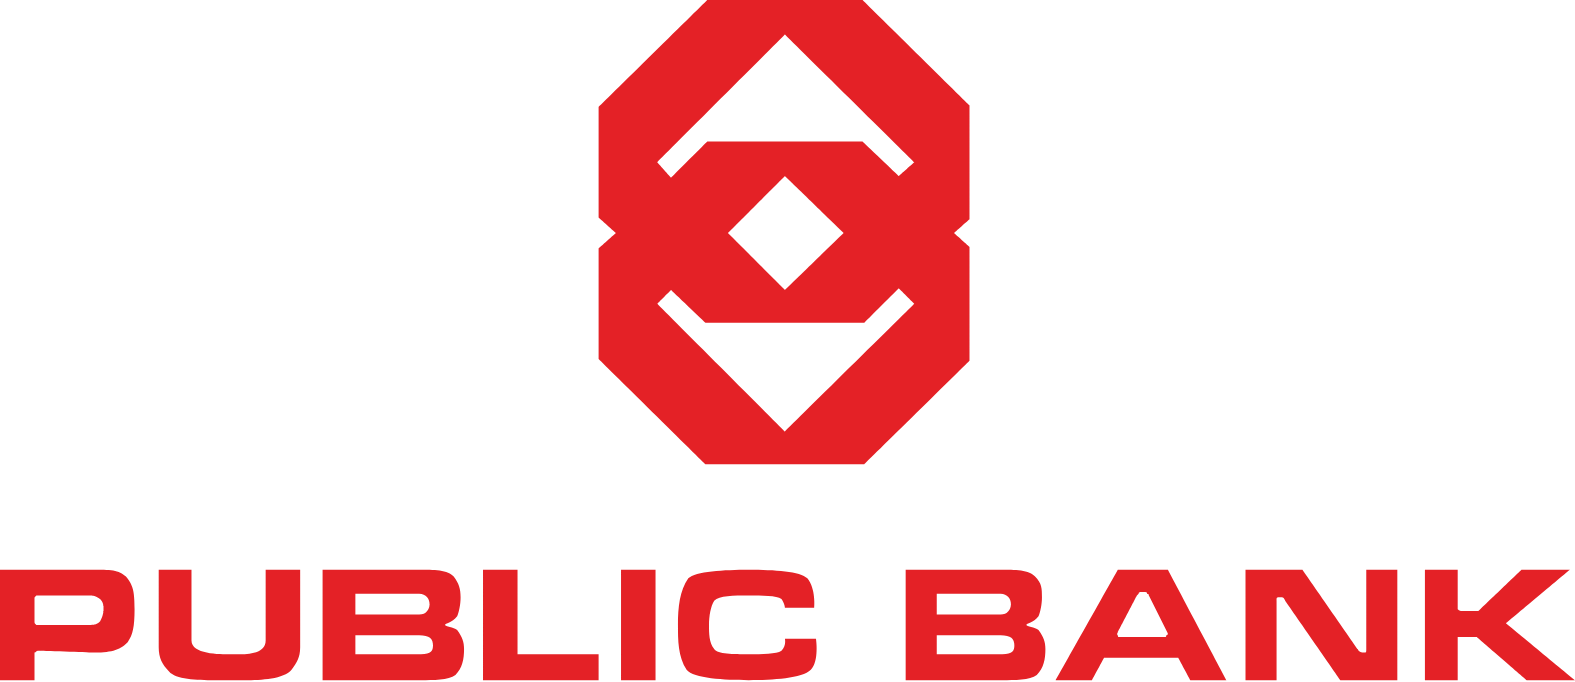 PublicBank.png